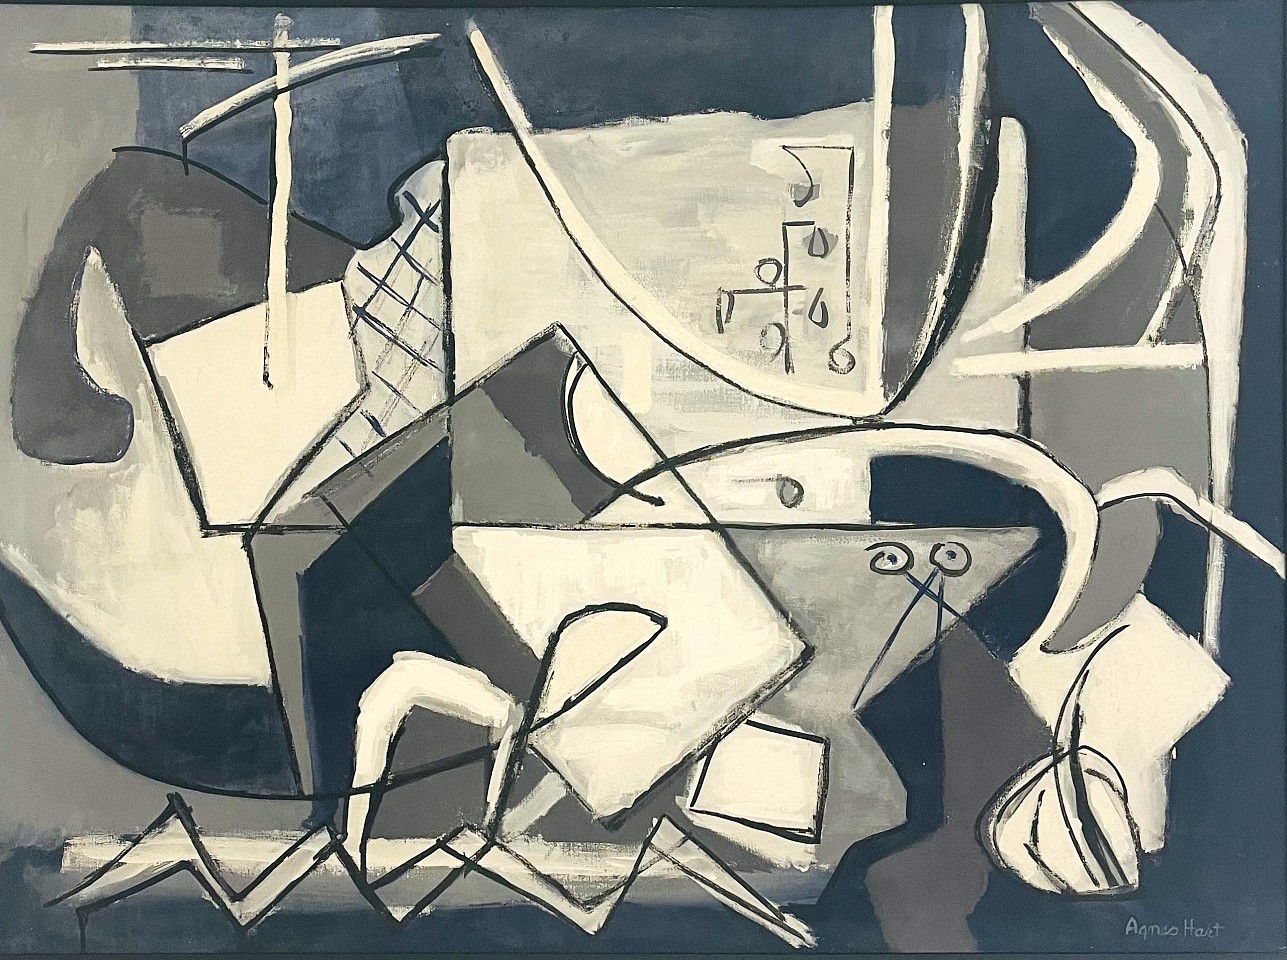 Agnes  Hart, Composition, 1953
Oil on canvas, 37 x 50 1/2 in.
HAR001